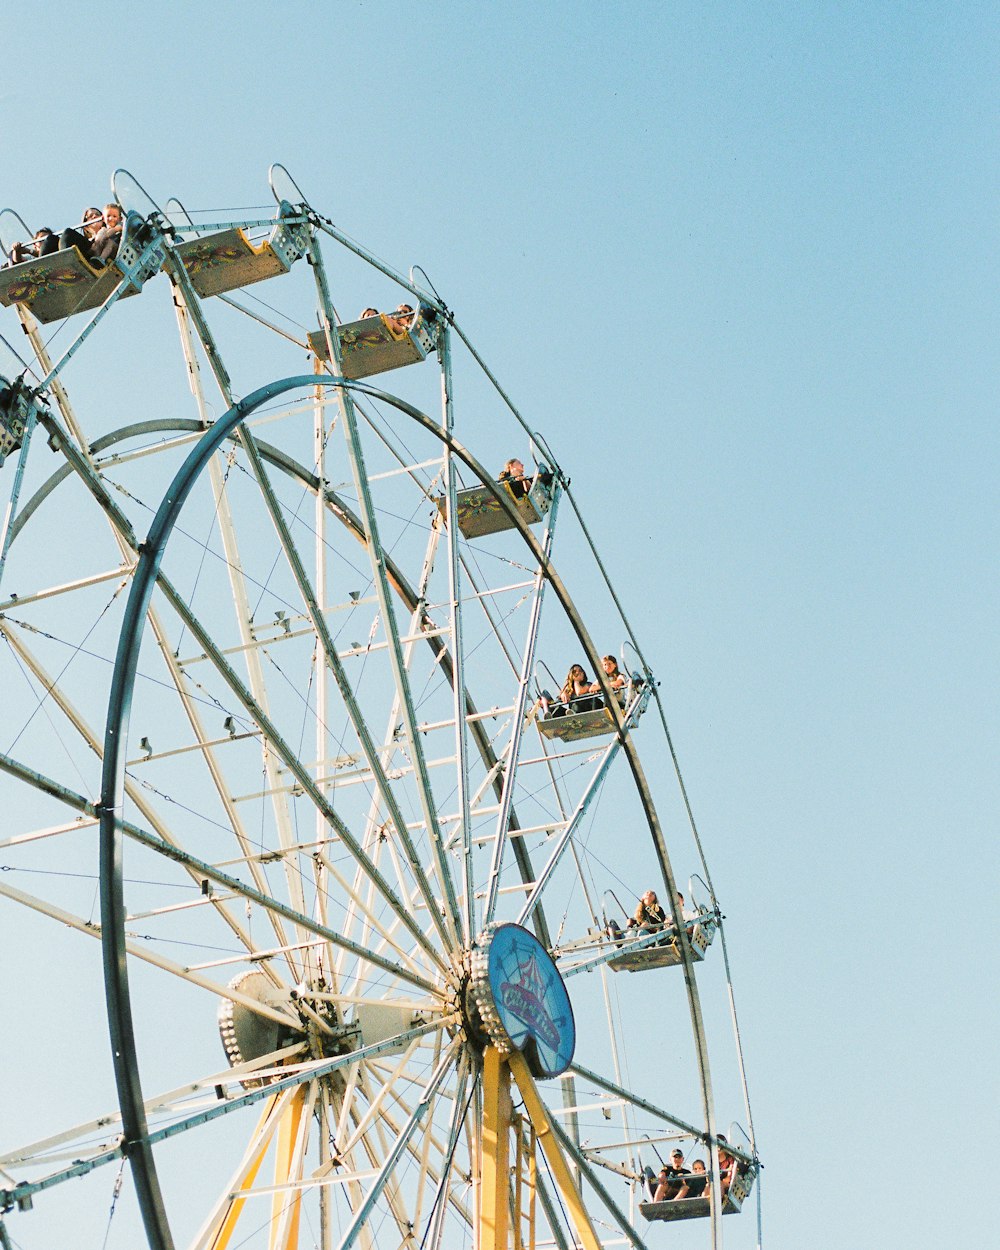 a ferris wheel with people on it